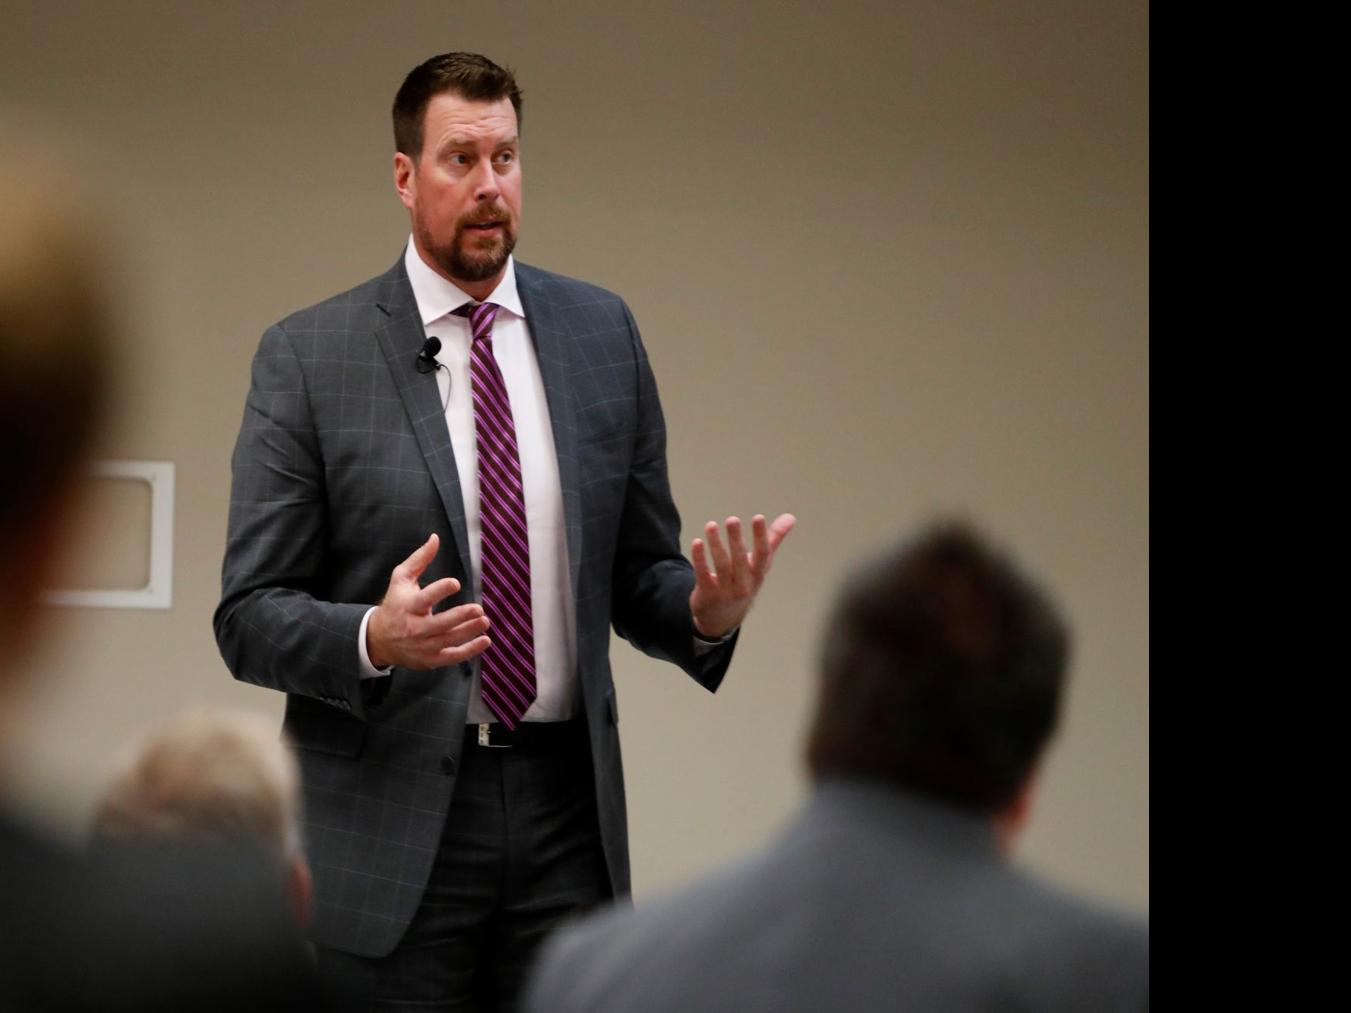 Returning home: Ryan Leaf delivers powerful message to Great Falls